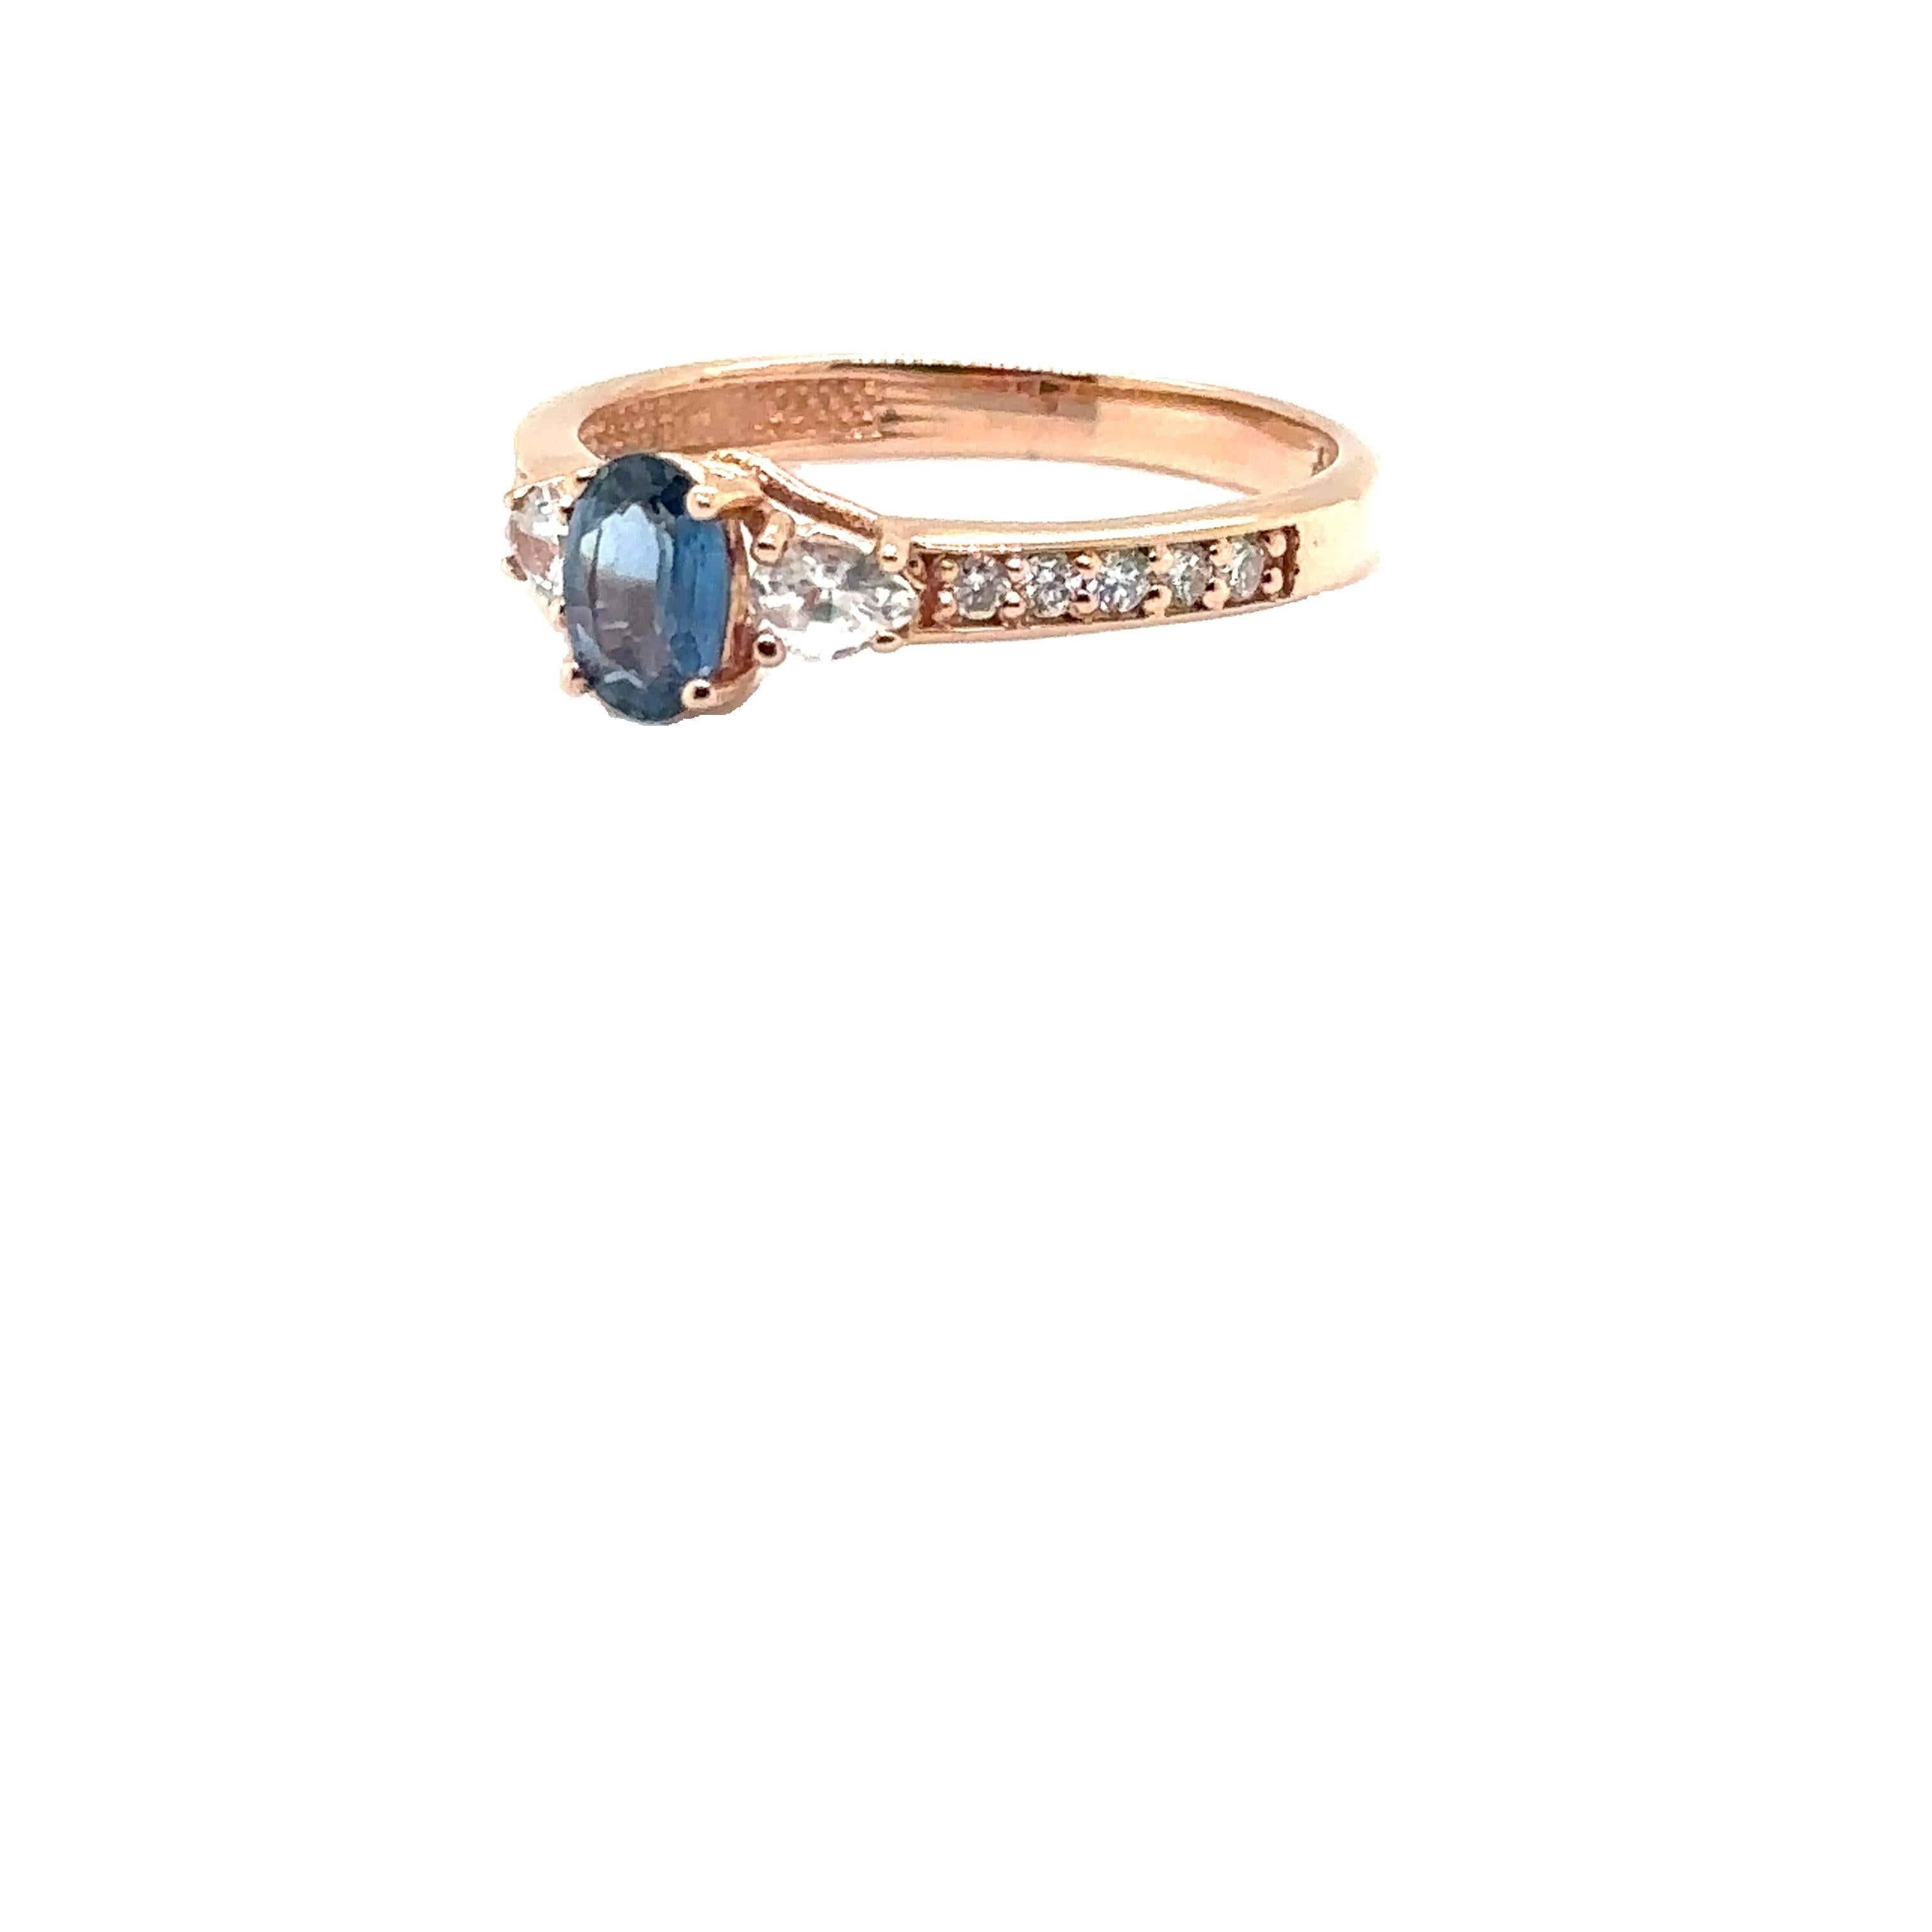 JAS-21-2240 - 14K ROSE GOLD OVAL SAPPHIRE RING with WHITE SAPPHIRES & DIAMONDS For Sale 3